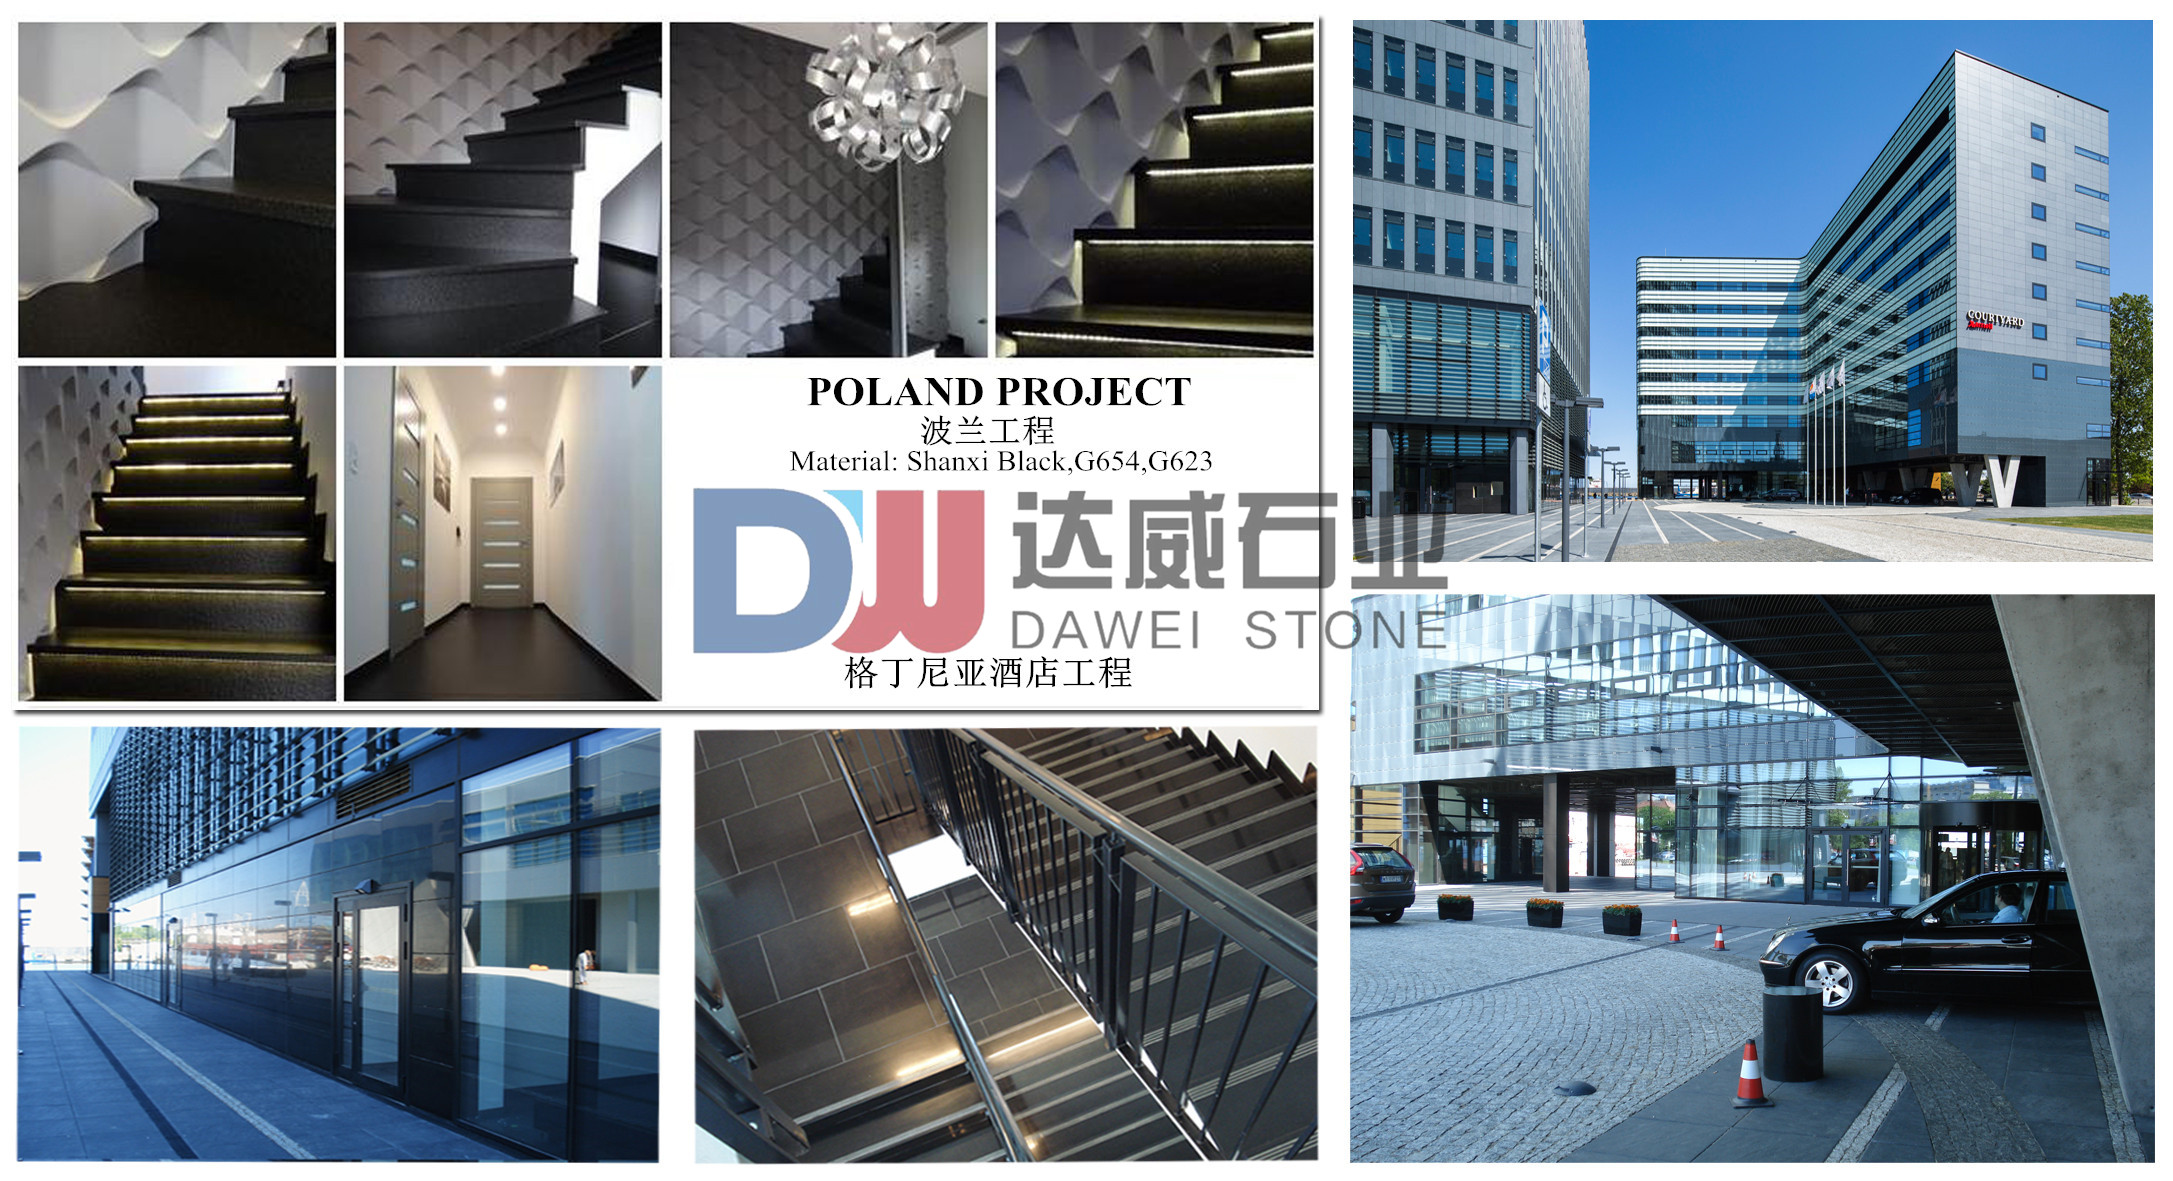 Project in Poland